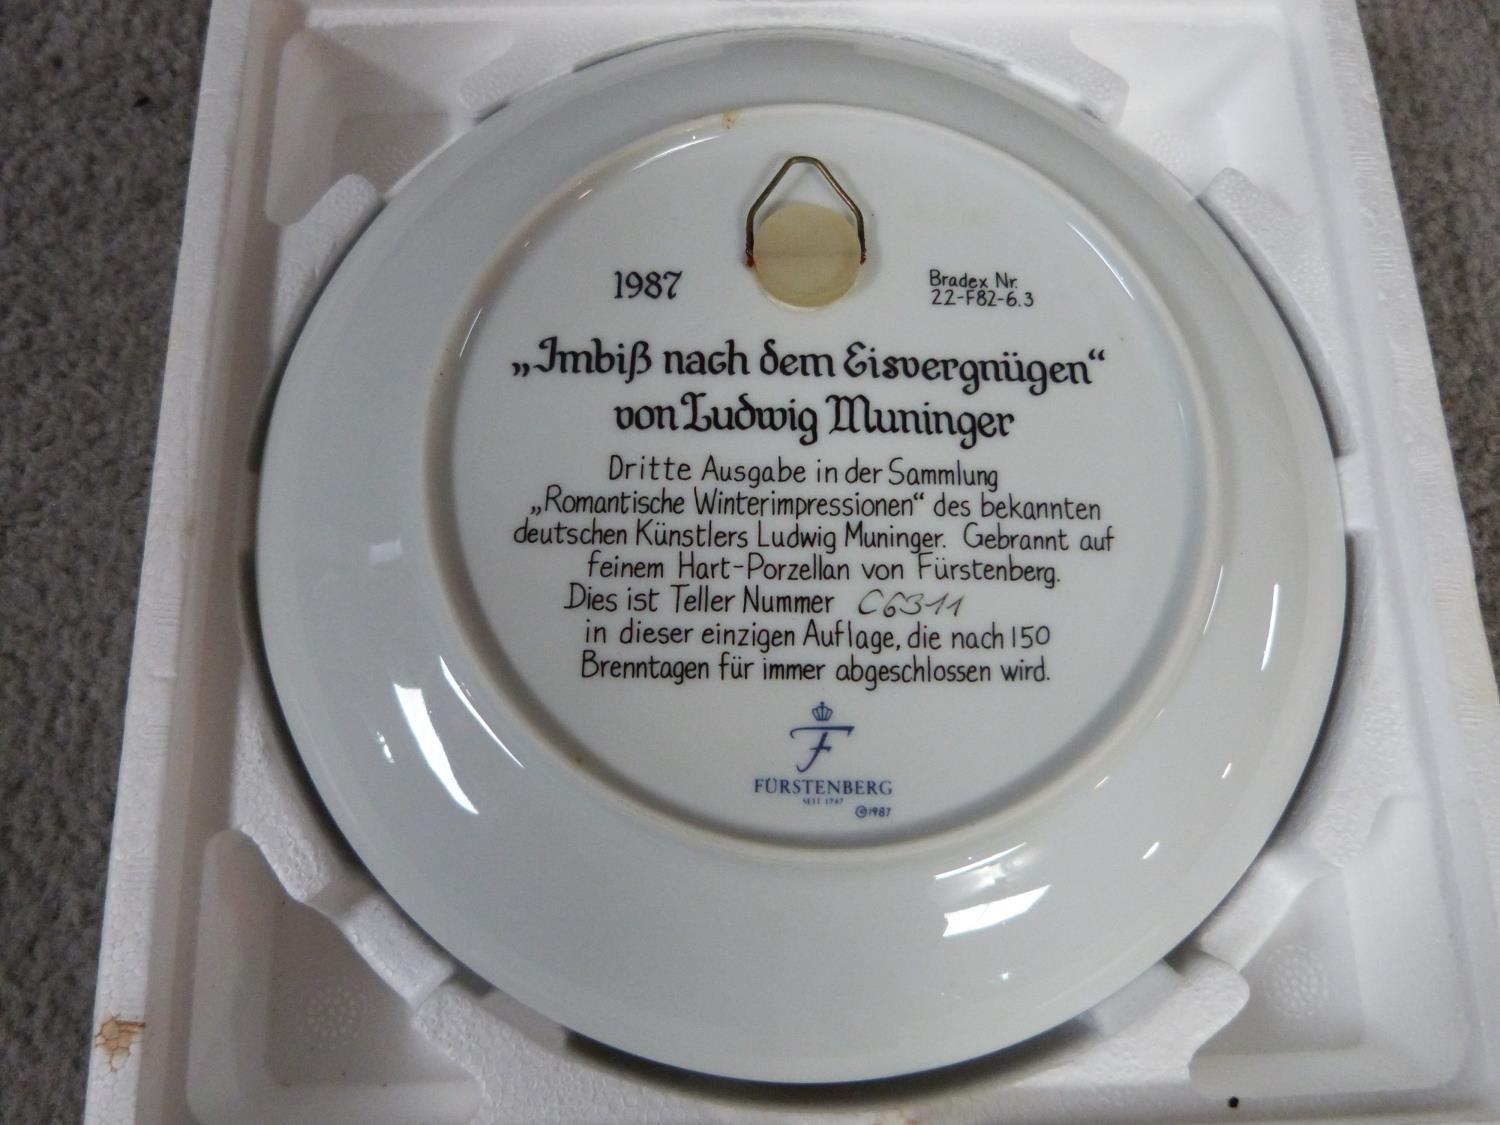 Four limited edition German porcelain plates with original boxes and certificates of authenticity. - Image 7 of 11